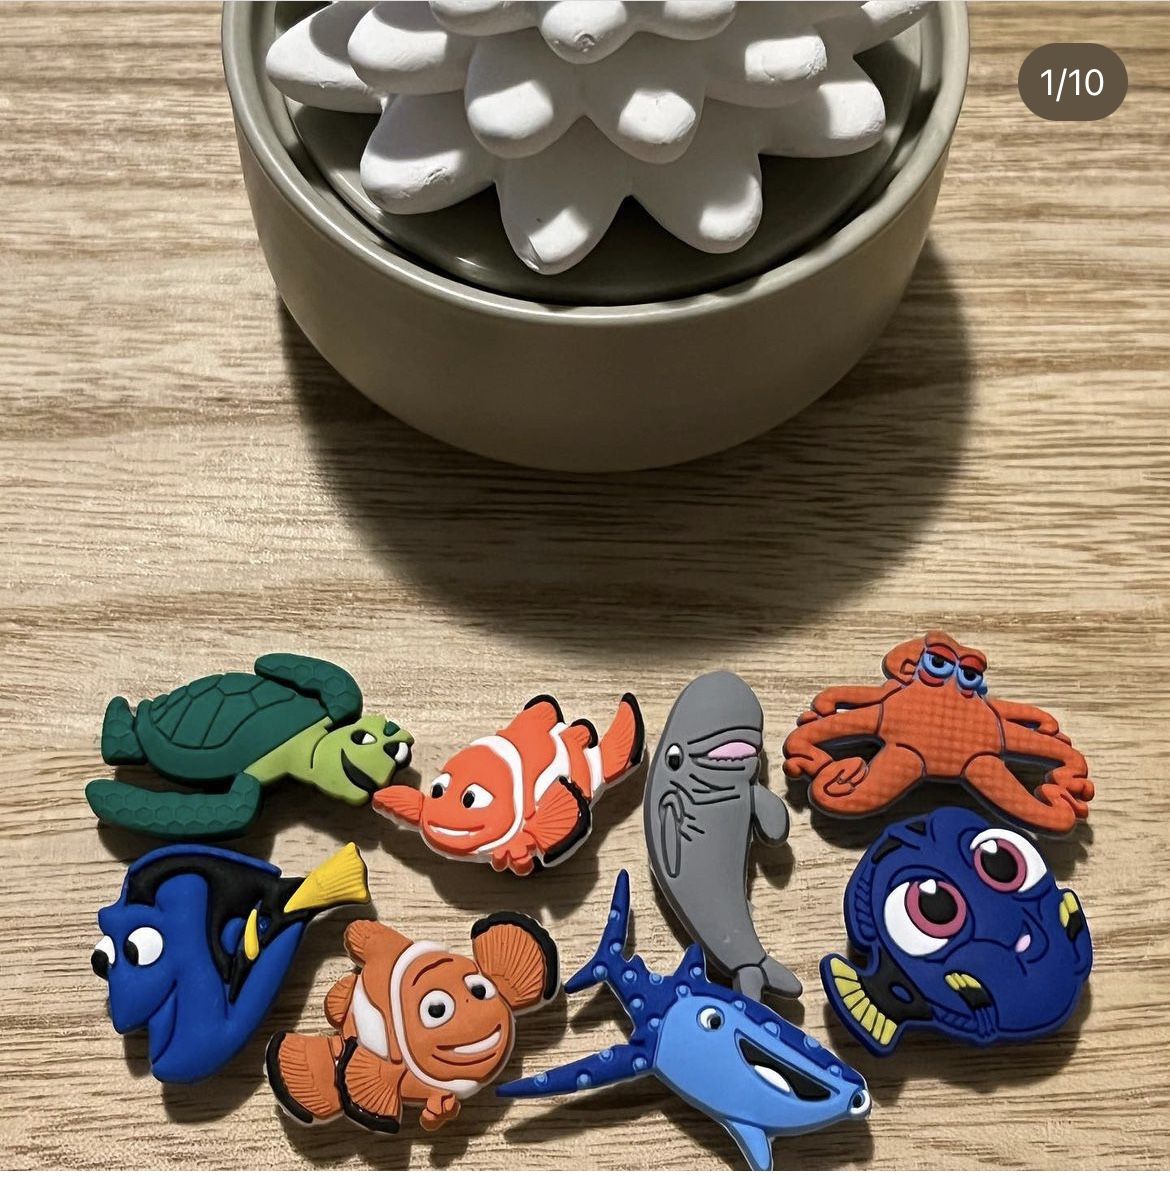 Finding Nemo/dory Croc Charms $2.50 EaCh 